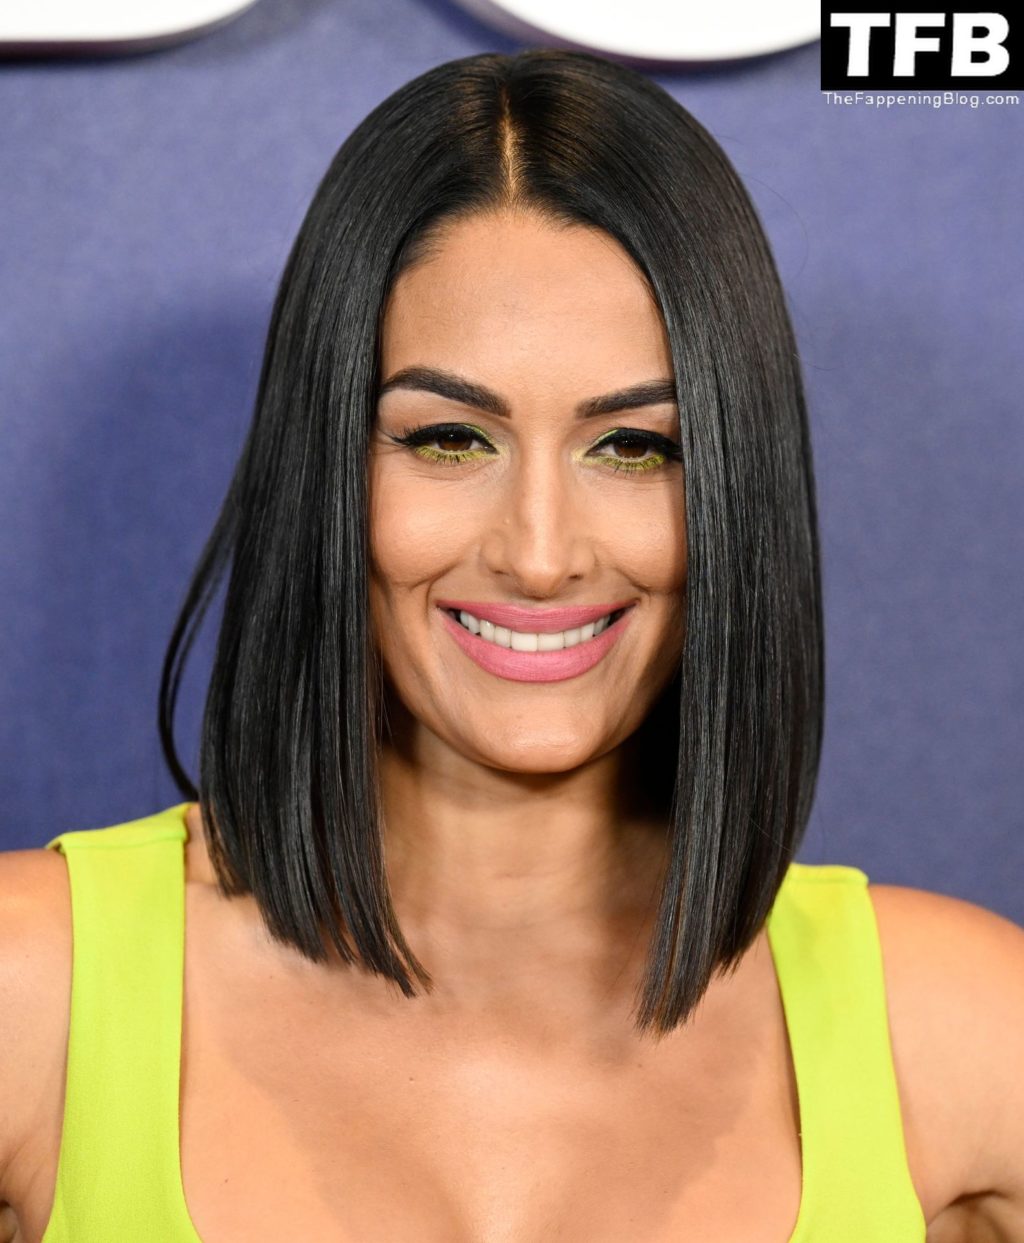 Nikki Bella Sexy The Fappening Blog 6 1024x1243 - Nikki Bella Flaunts Her Cleavage at NBCUniversal’s 2022 Upfront Press Junket (21 Photos)